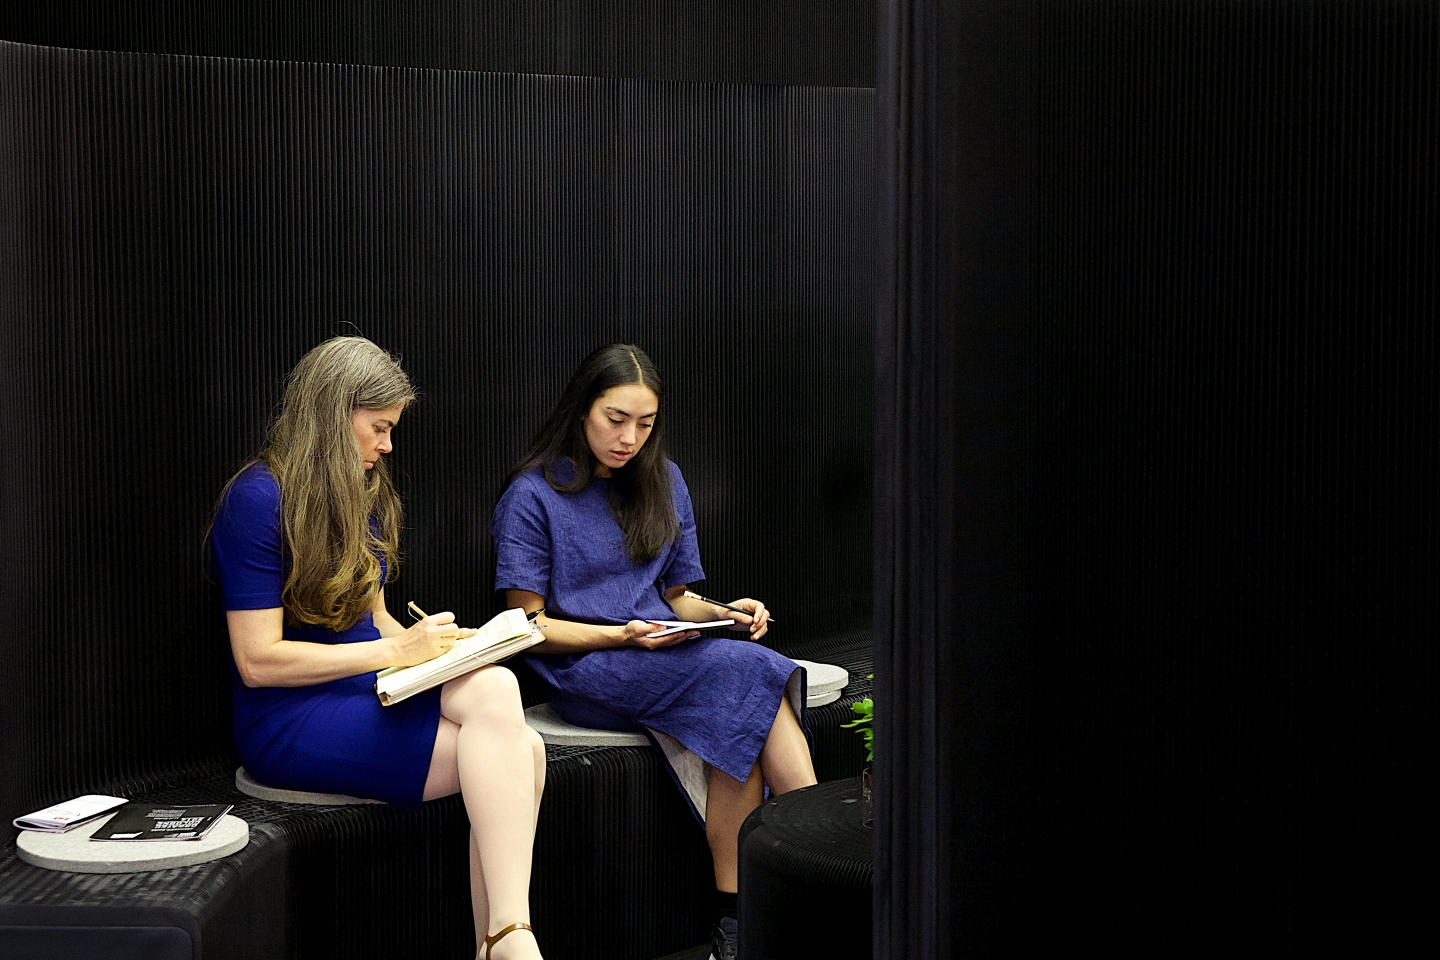 Two women in blue dresses sit on wool felt pads atop a black benchwall